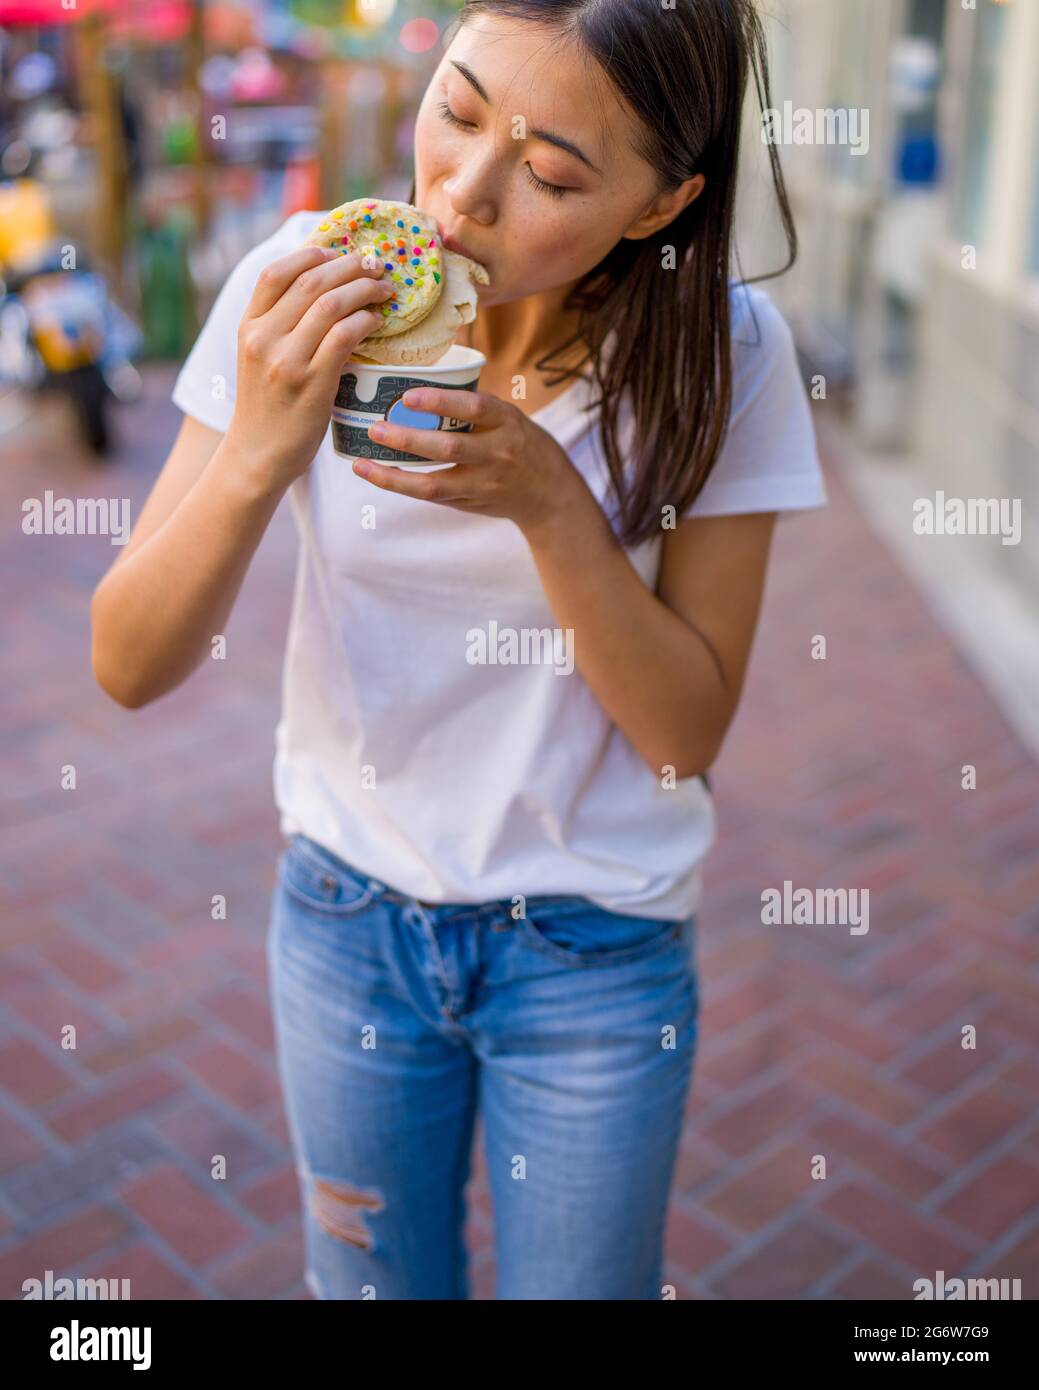 Happy Young Asian Woman Eating an Ice Cream Sandwich in an Urban Setting Stock Photo